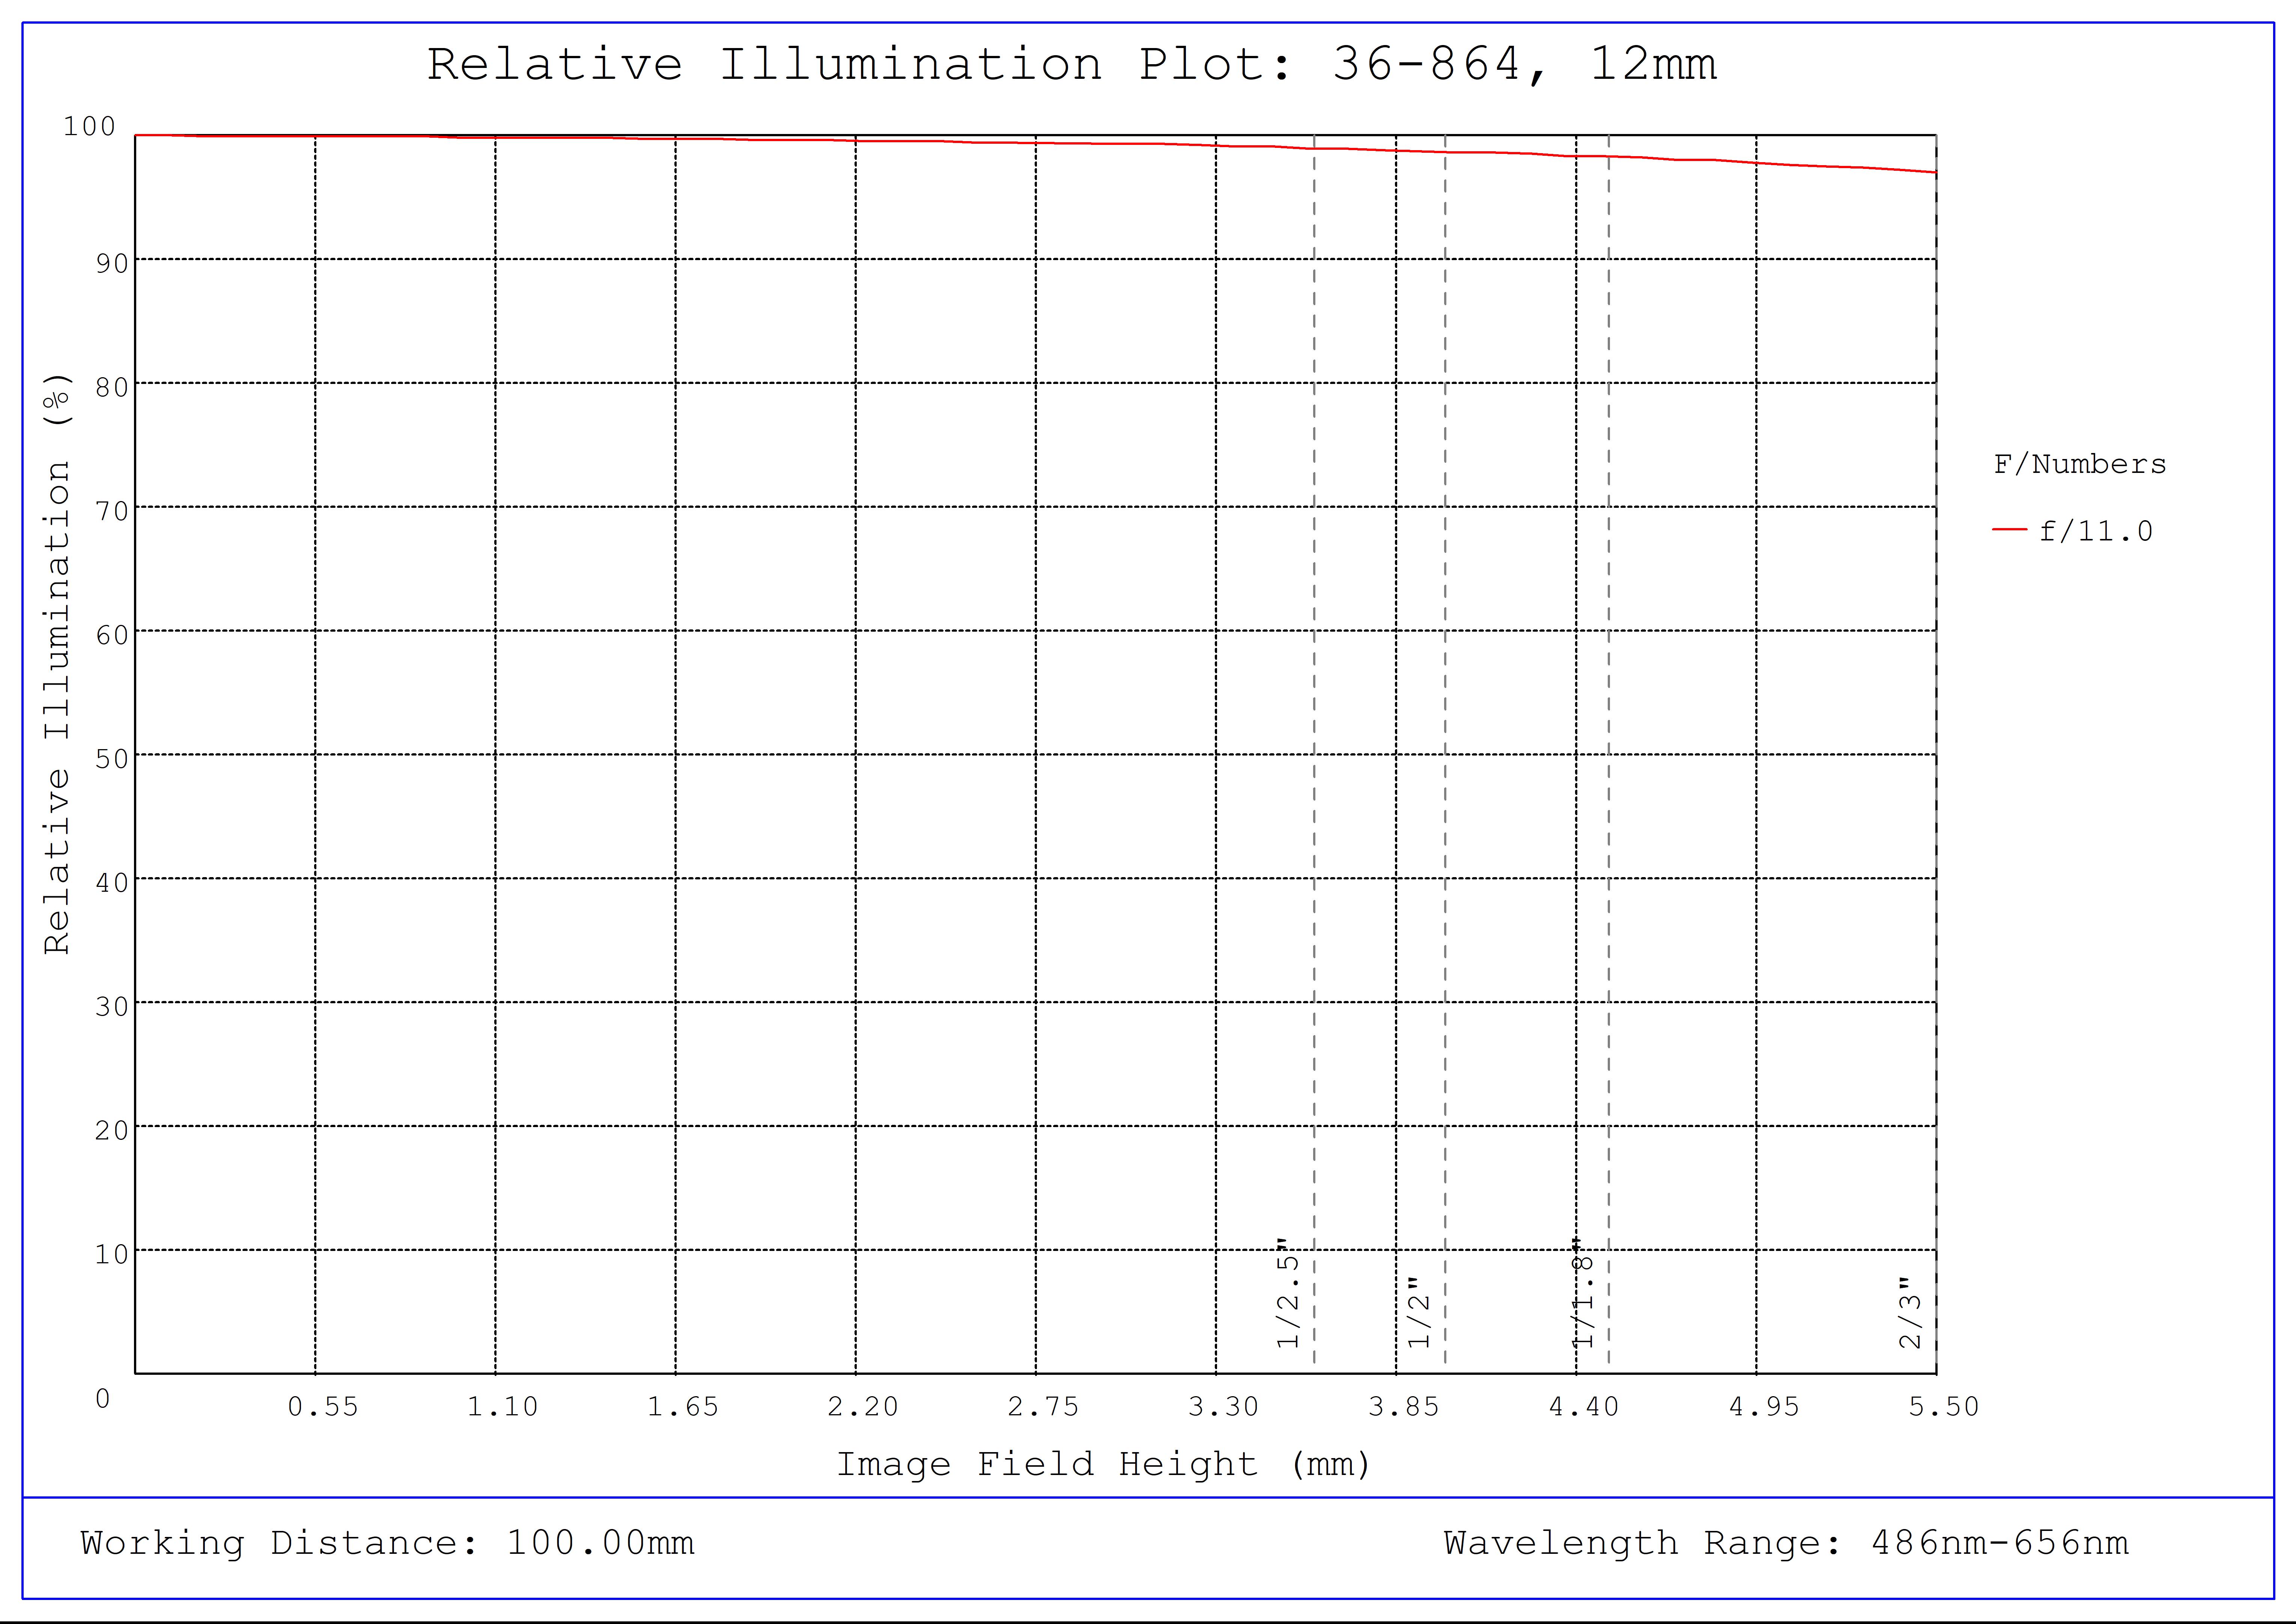 #36-864, 12mm f/11, 1000mm-∞ Primary WD, HRr Series Fixed Focal Length Lens, Relative Illumination Plot